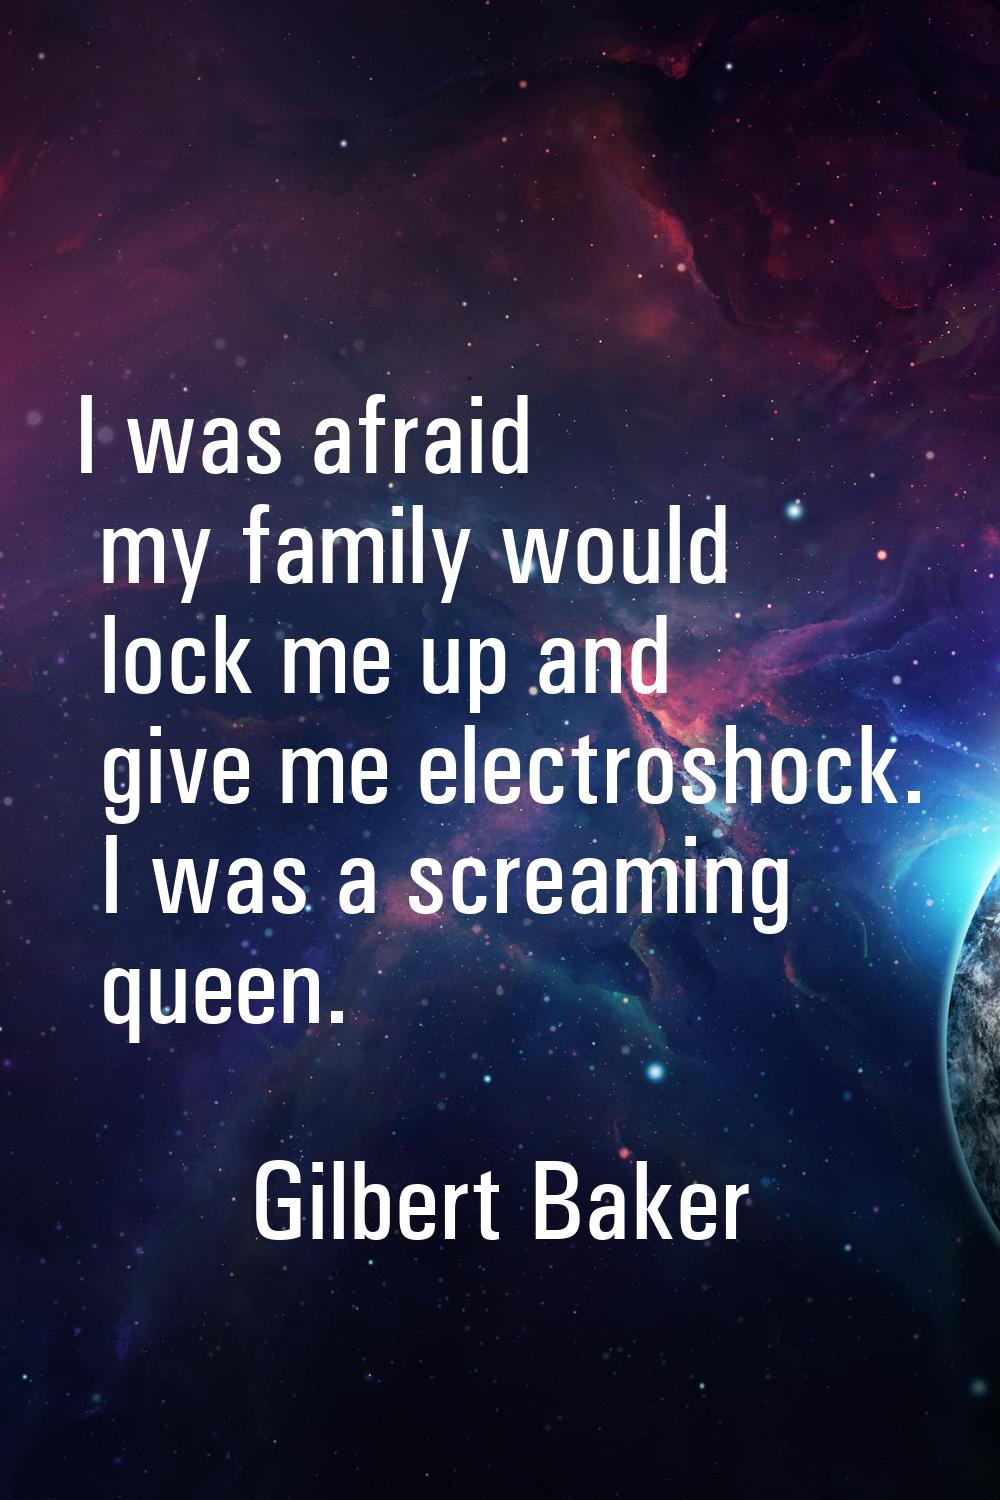 I was afraid my family would lock me up and give me electroshock. I was a screaming queen.